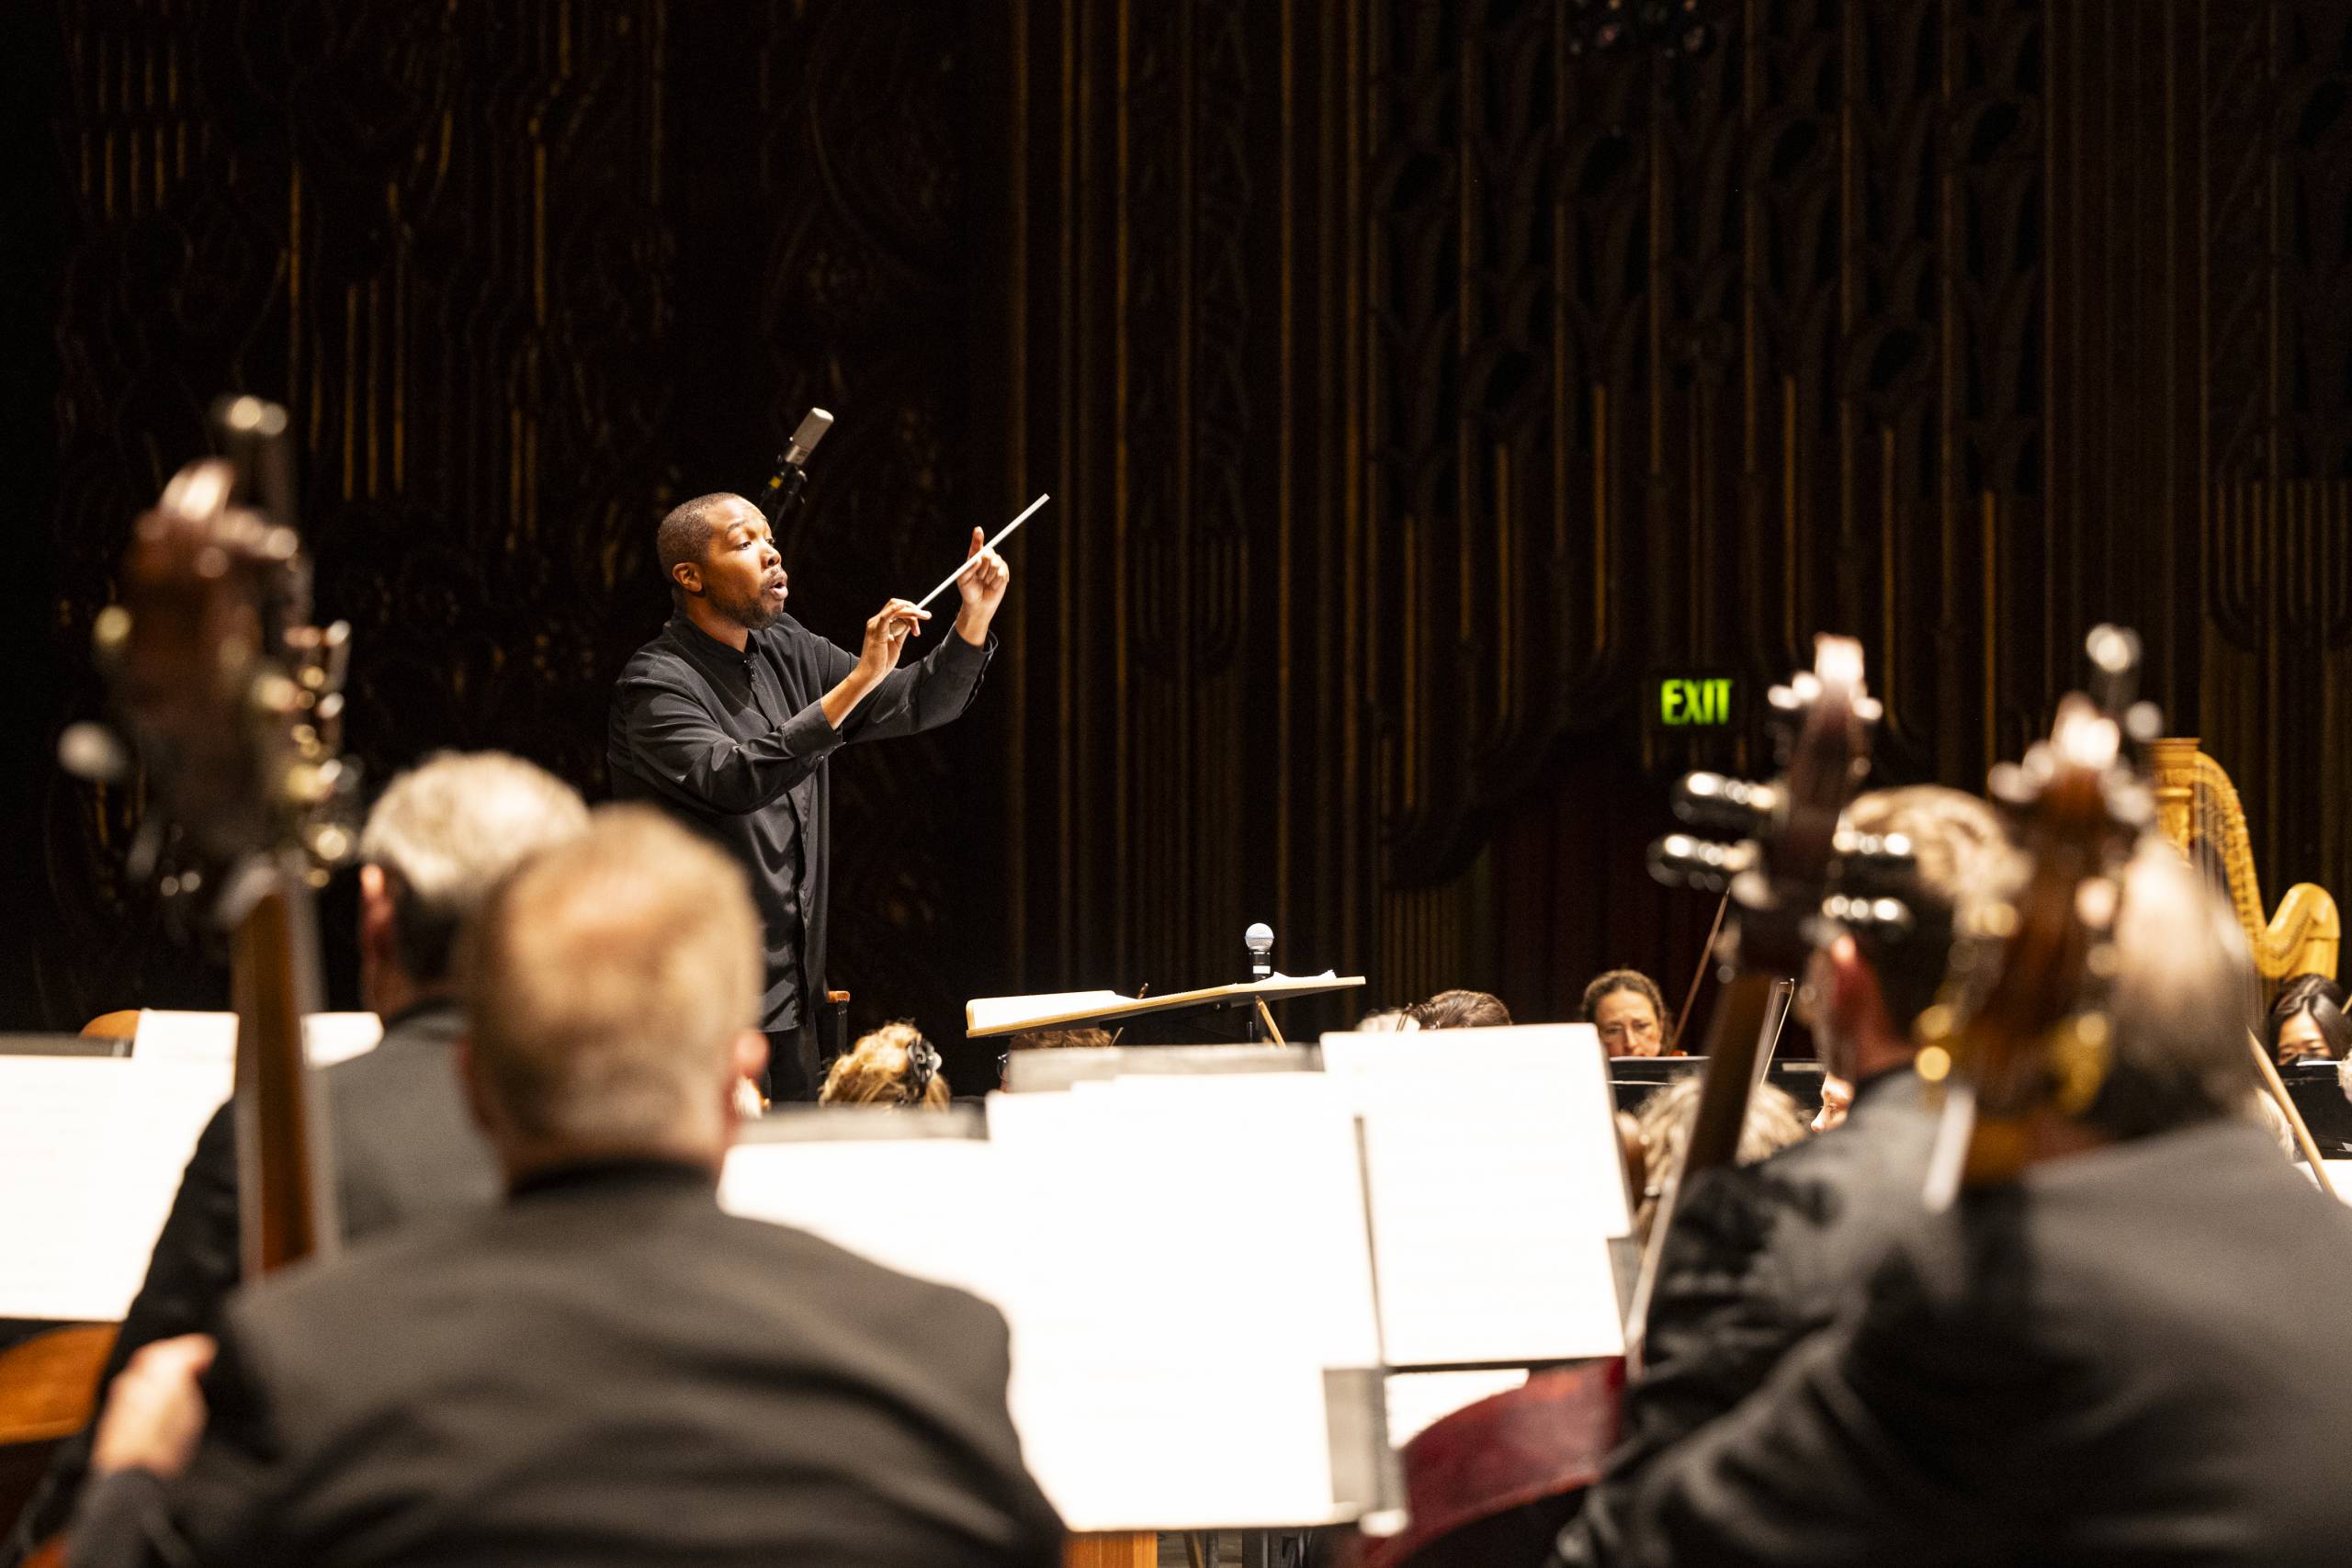 A conductor waves his baton as orchestra musicians look on,